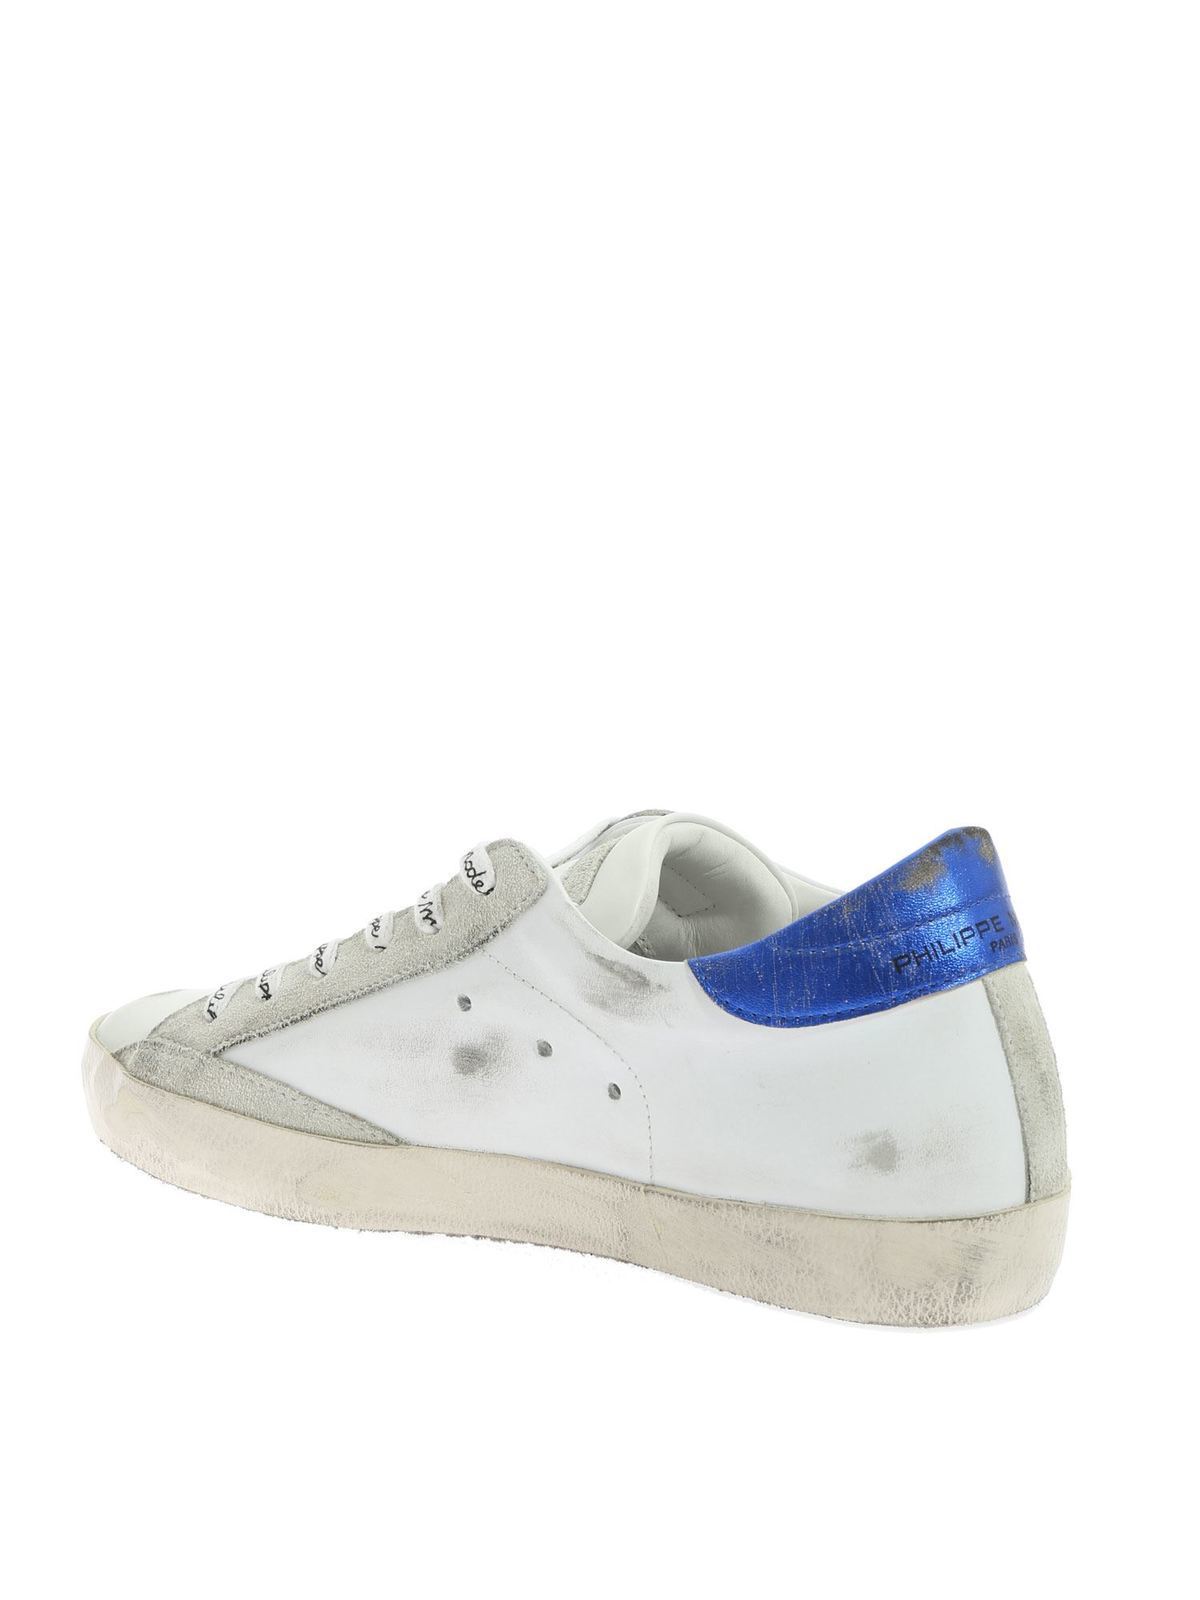 Philippe Model - Sneakers Classic bianche e blu - sneakers - CLLDVM14